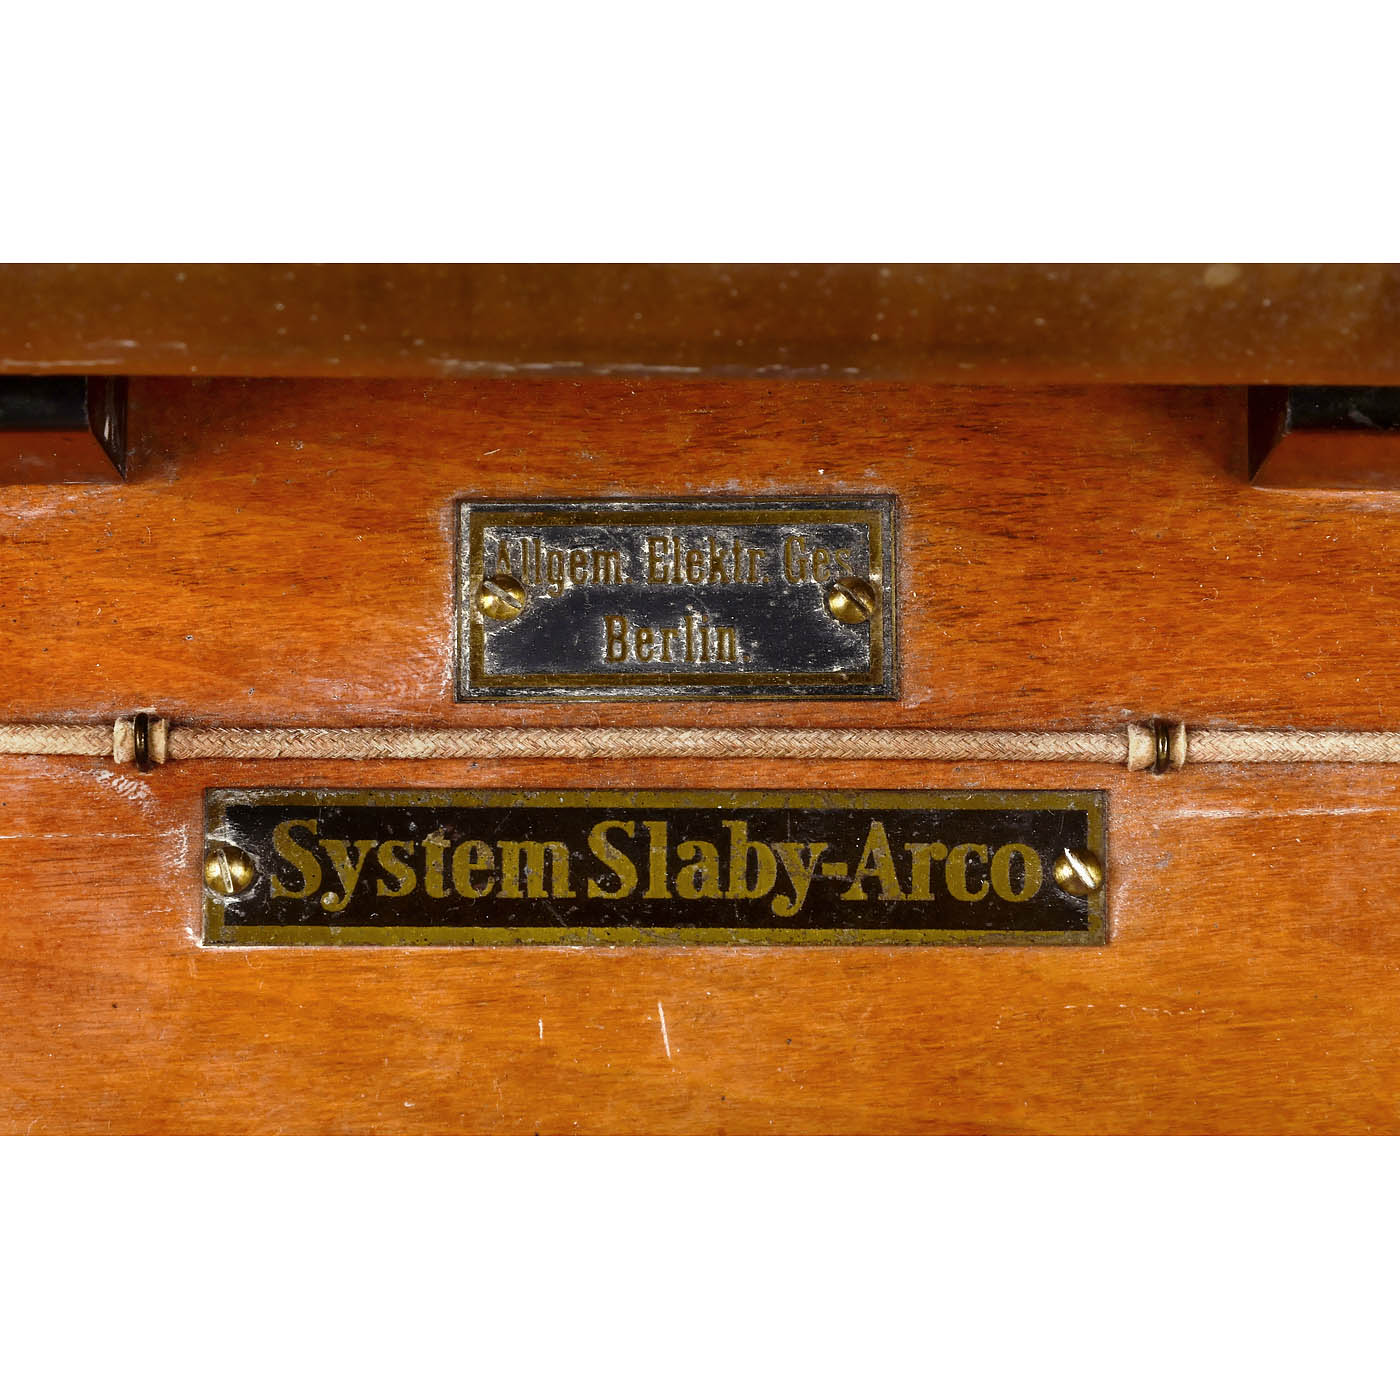 Slaby-Arco System Radiotelegraph Transmitter, c. 1900 - Image 3 of 3